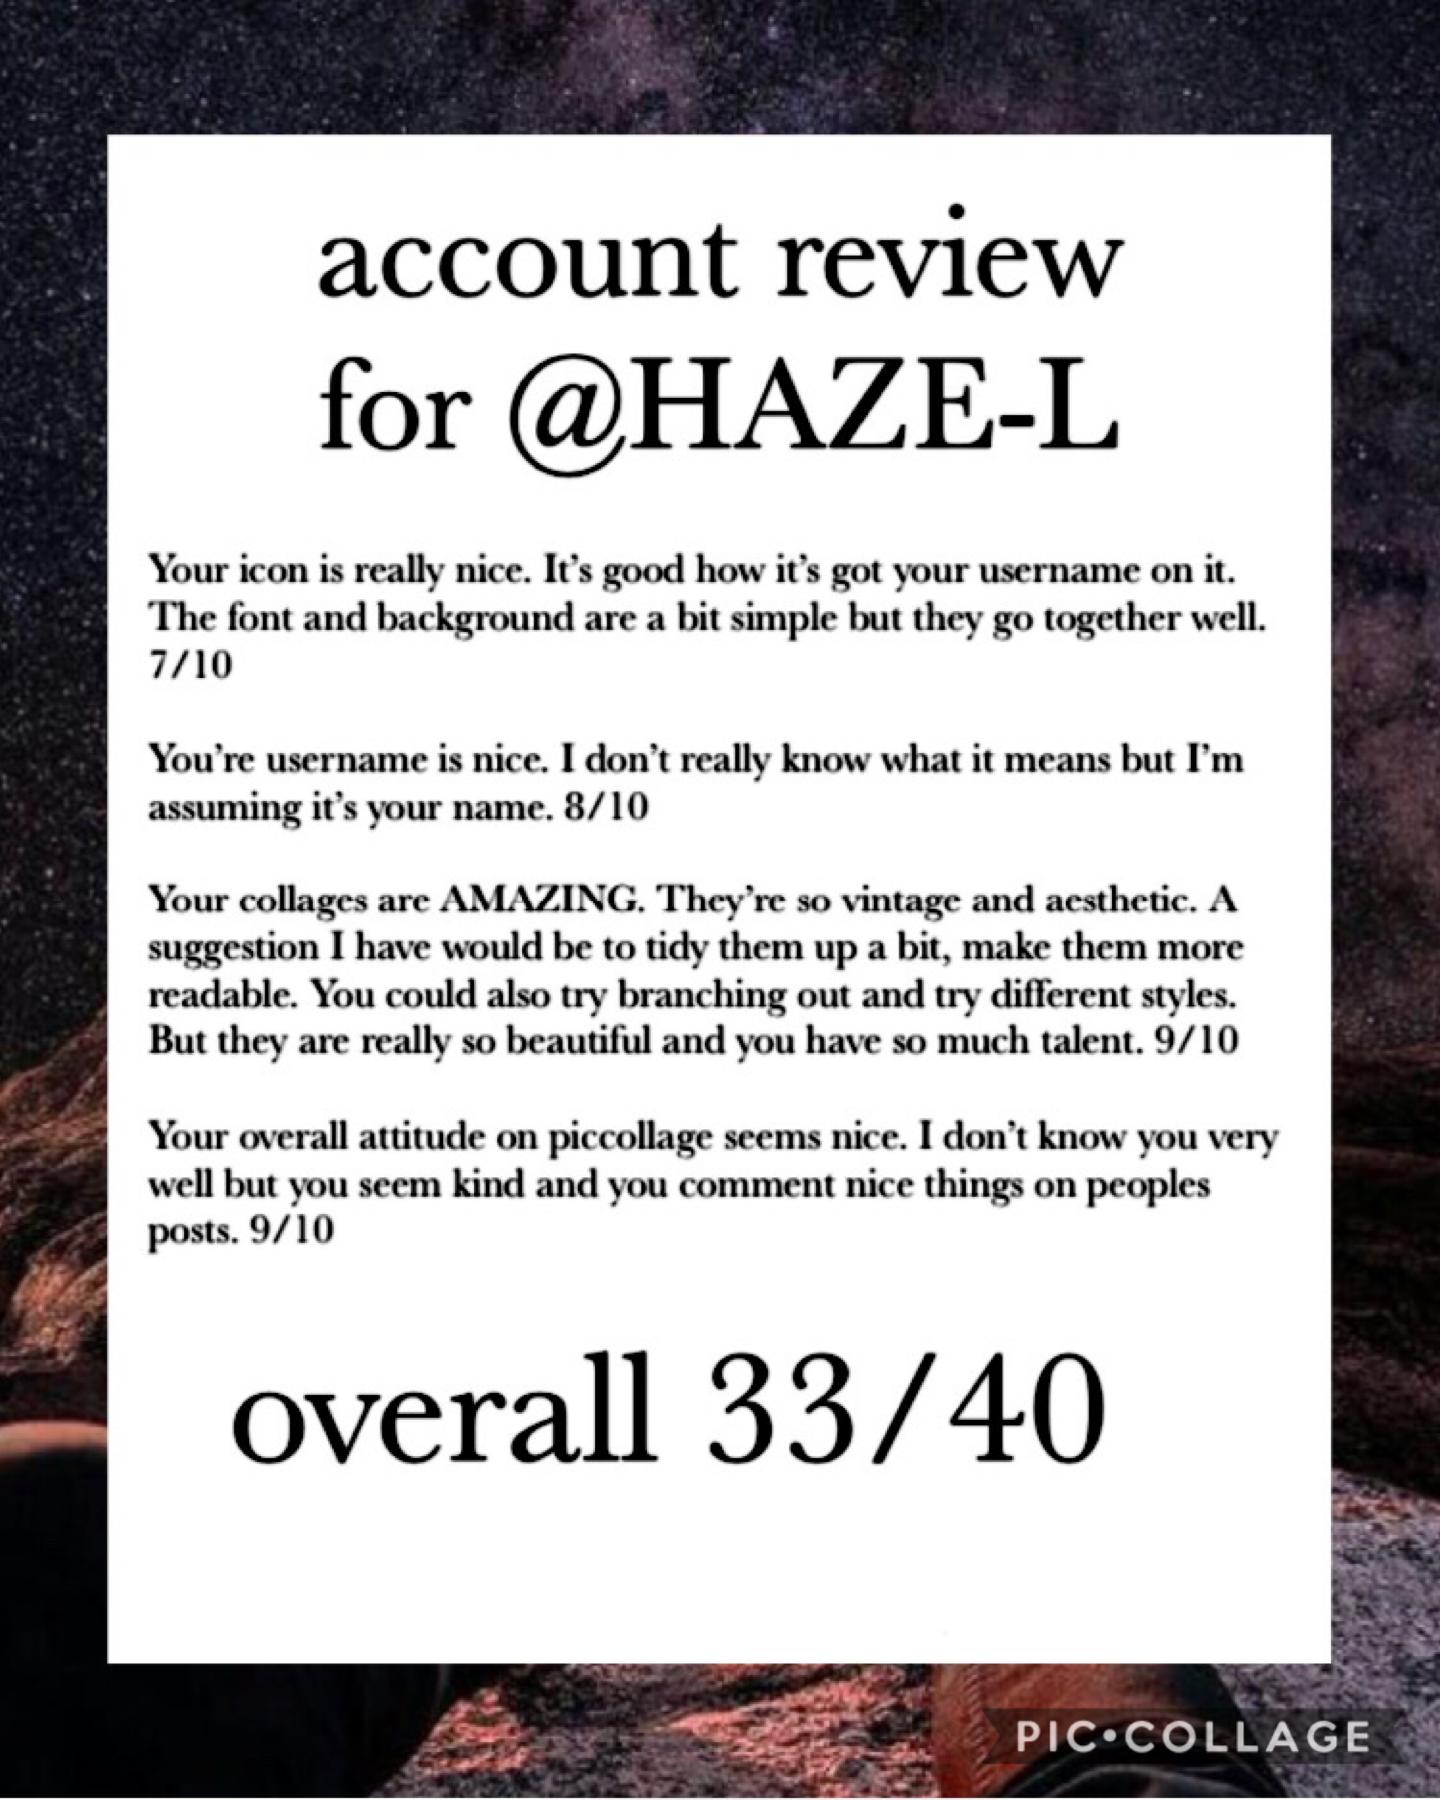 Account review for @HAZE-L